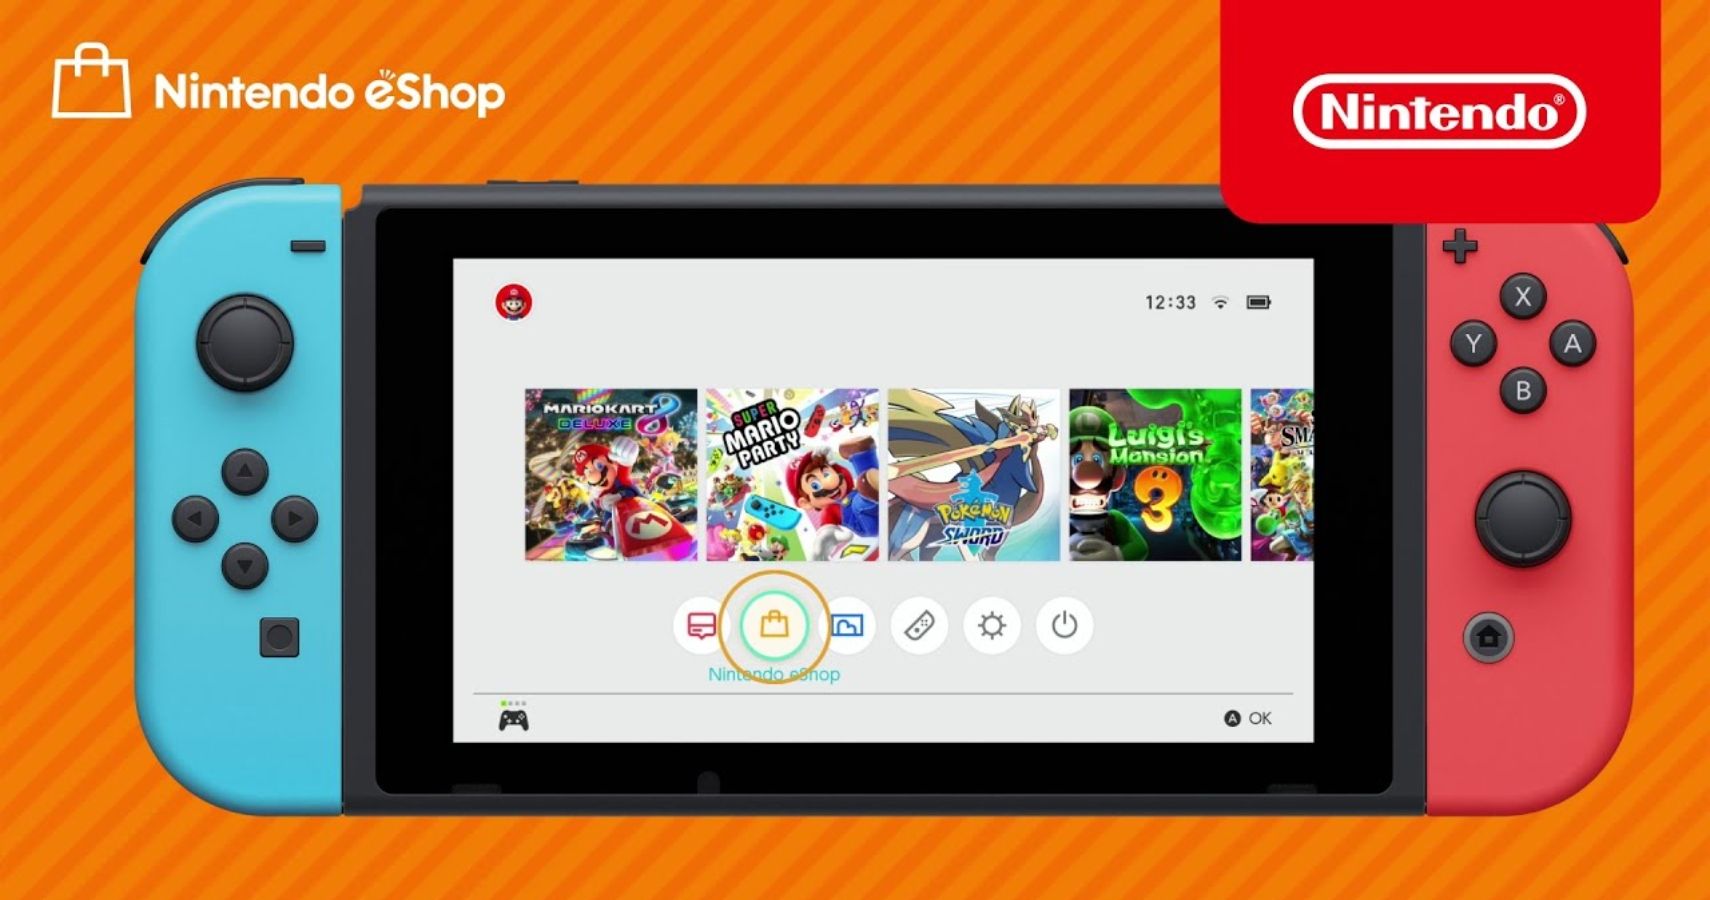 Developer About Beating Nintendo With Dirt Cheap Game Plans Keep All Prices Above $1.99